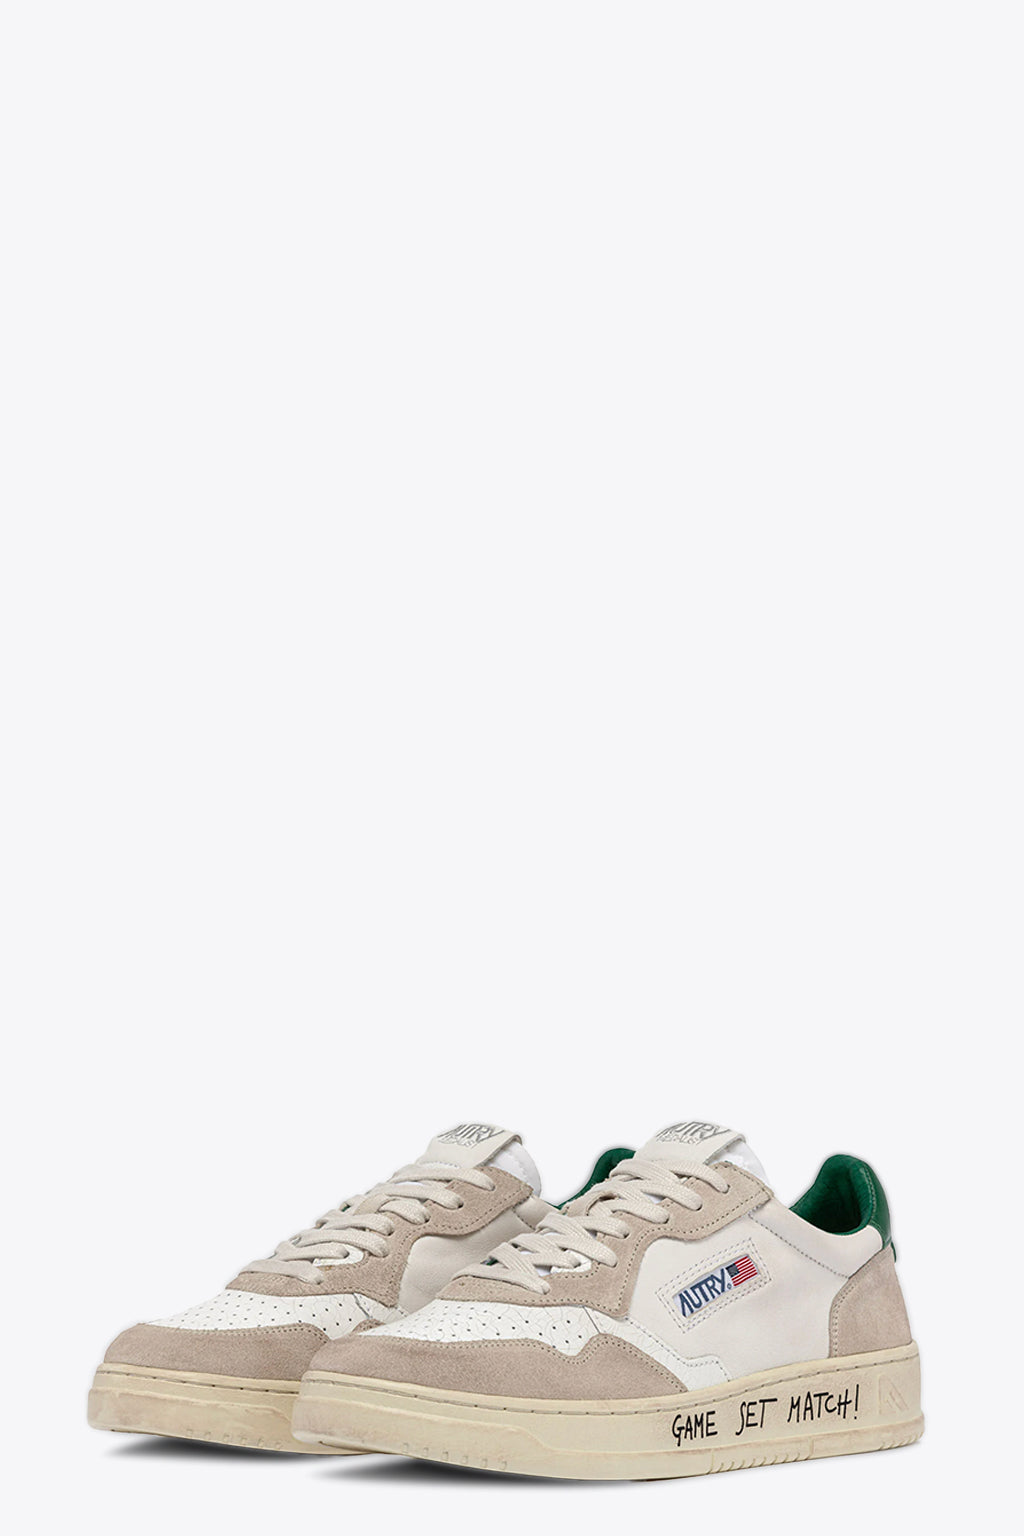 alt-image__White-leather-and-suede-low-sneaker-with-slogan---Medalist